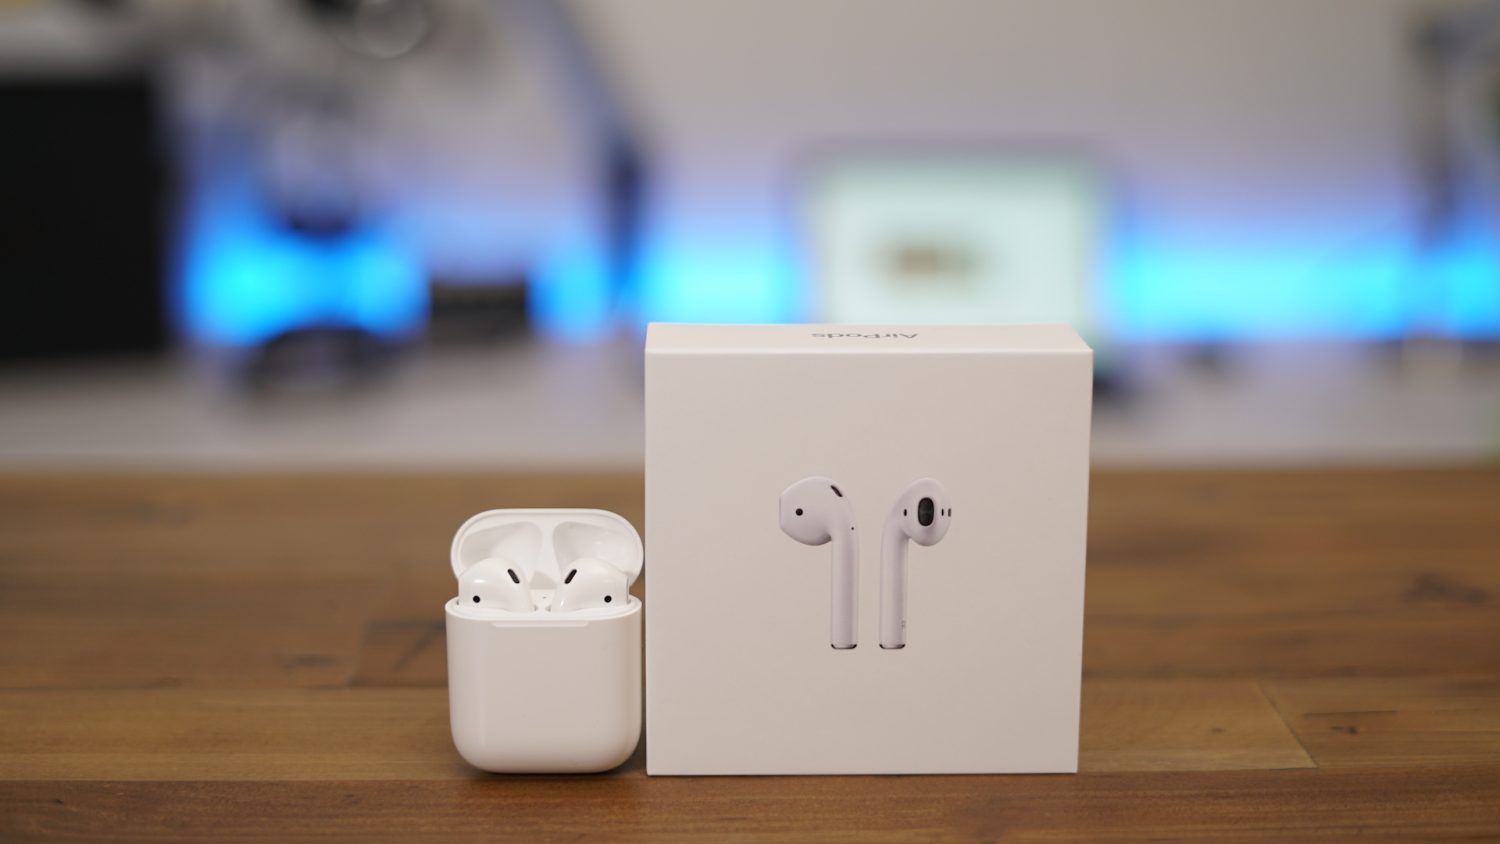 AirPods 2: New colors, wireless charging case, design, more - 9to5Mac